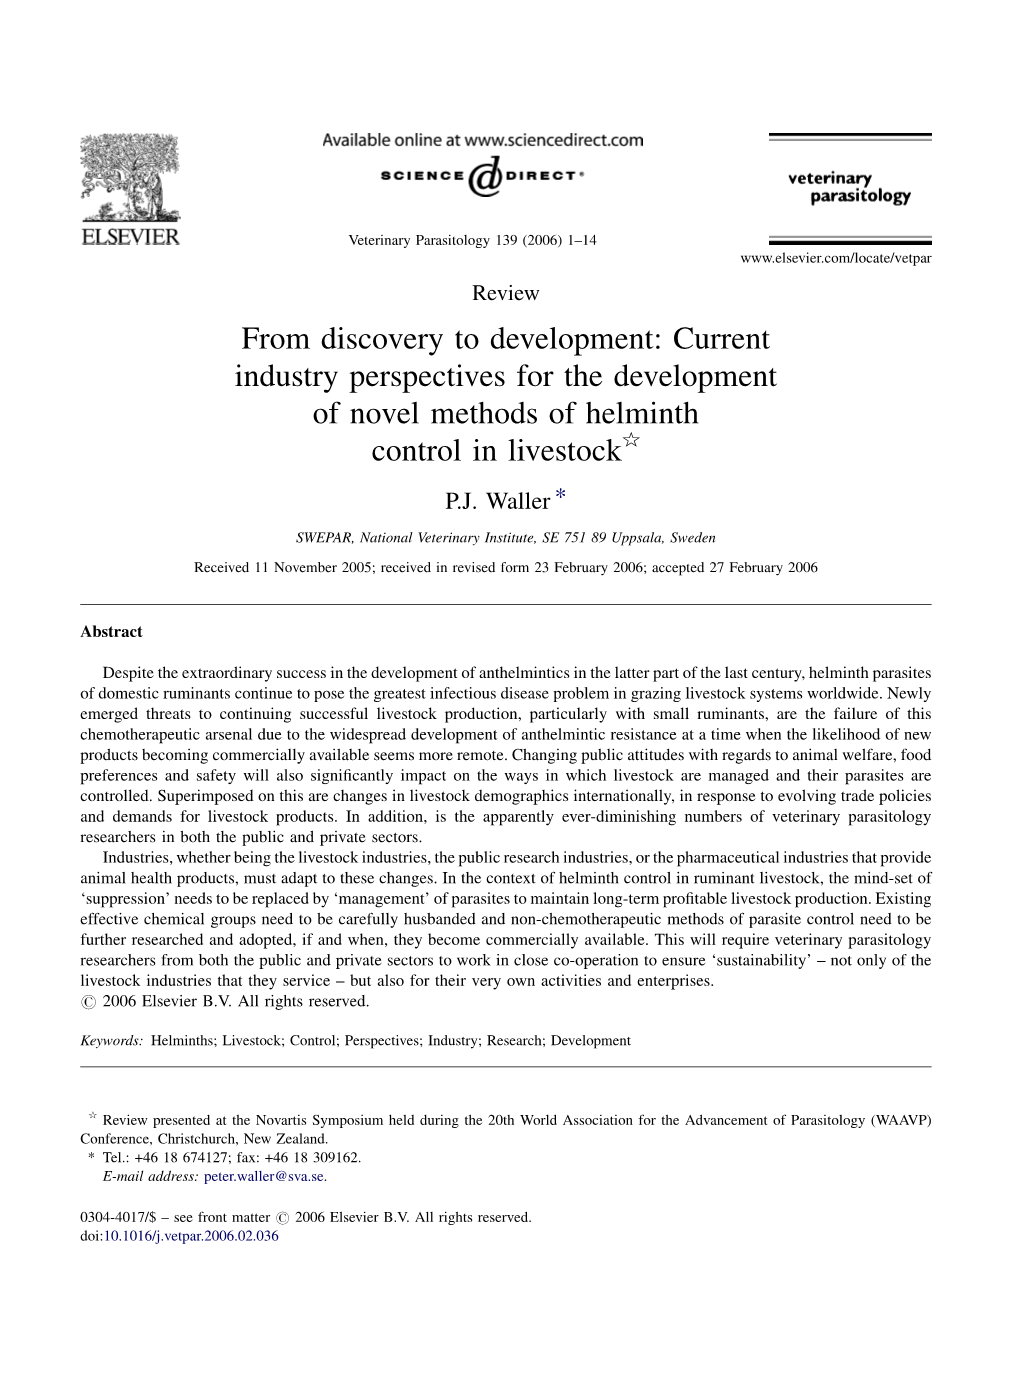 2006 Waller Industry Perspectives On